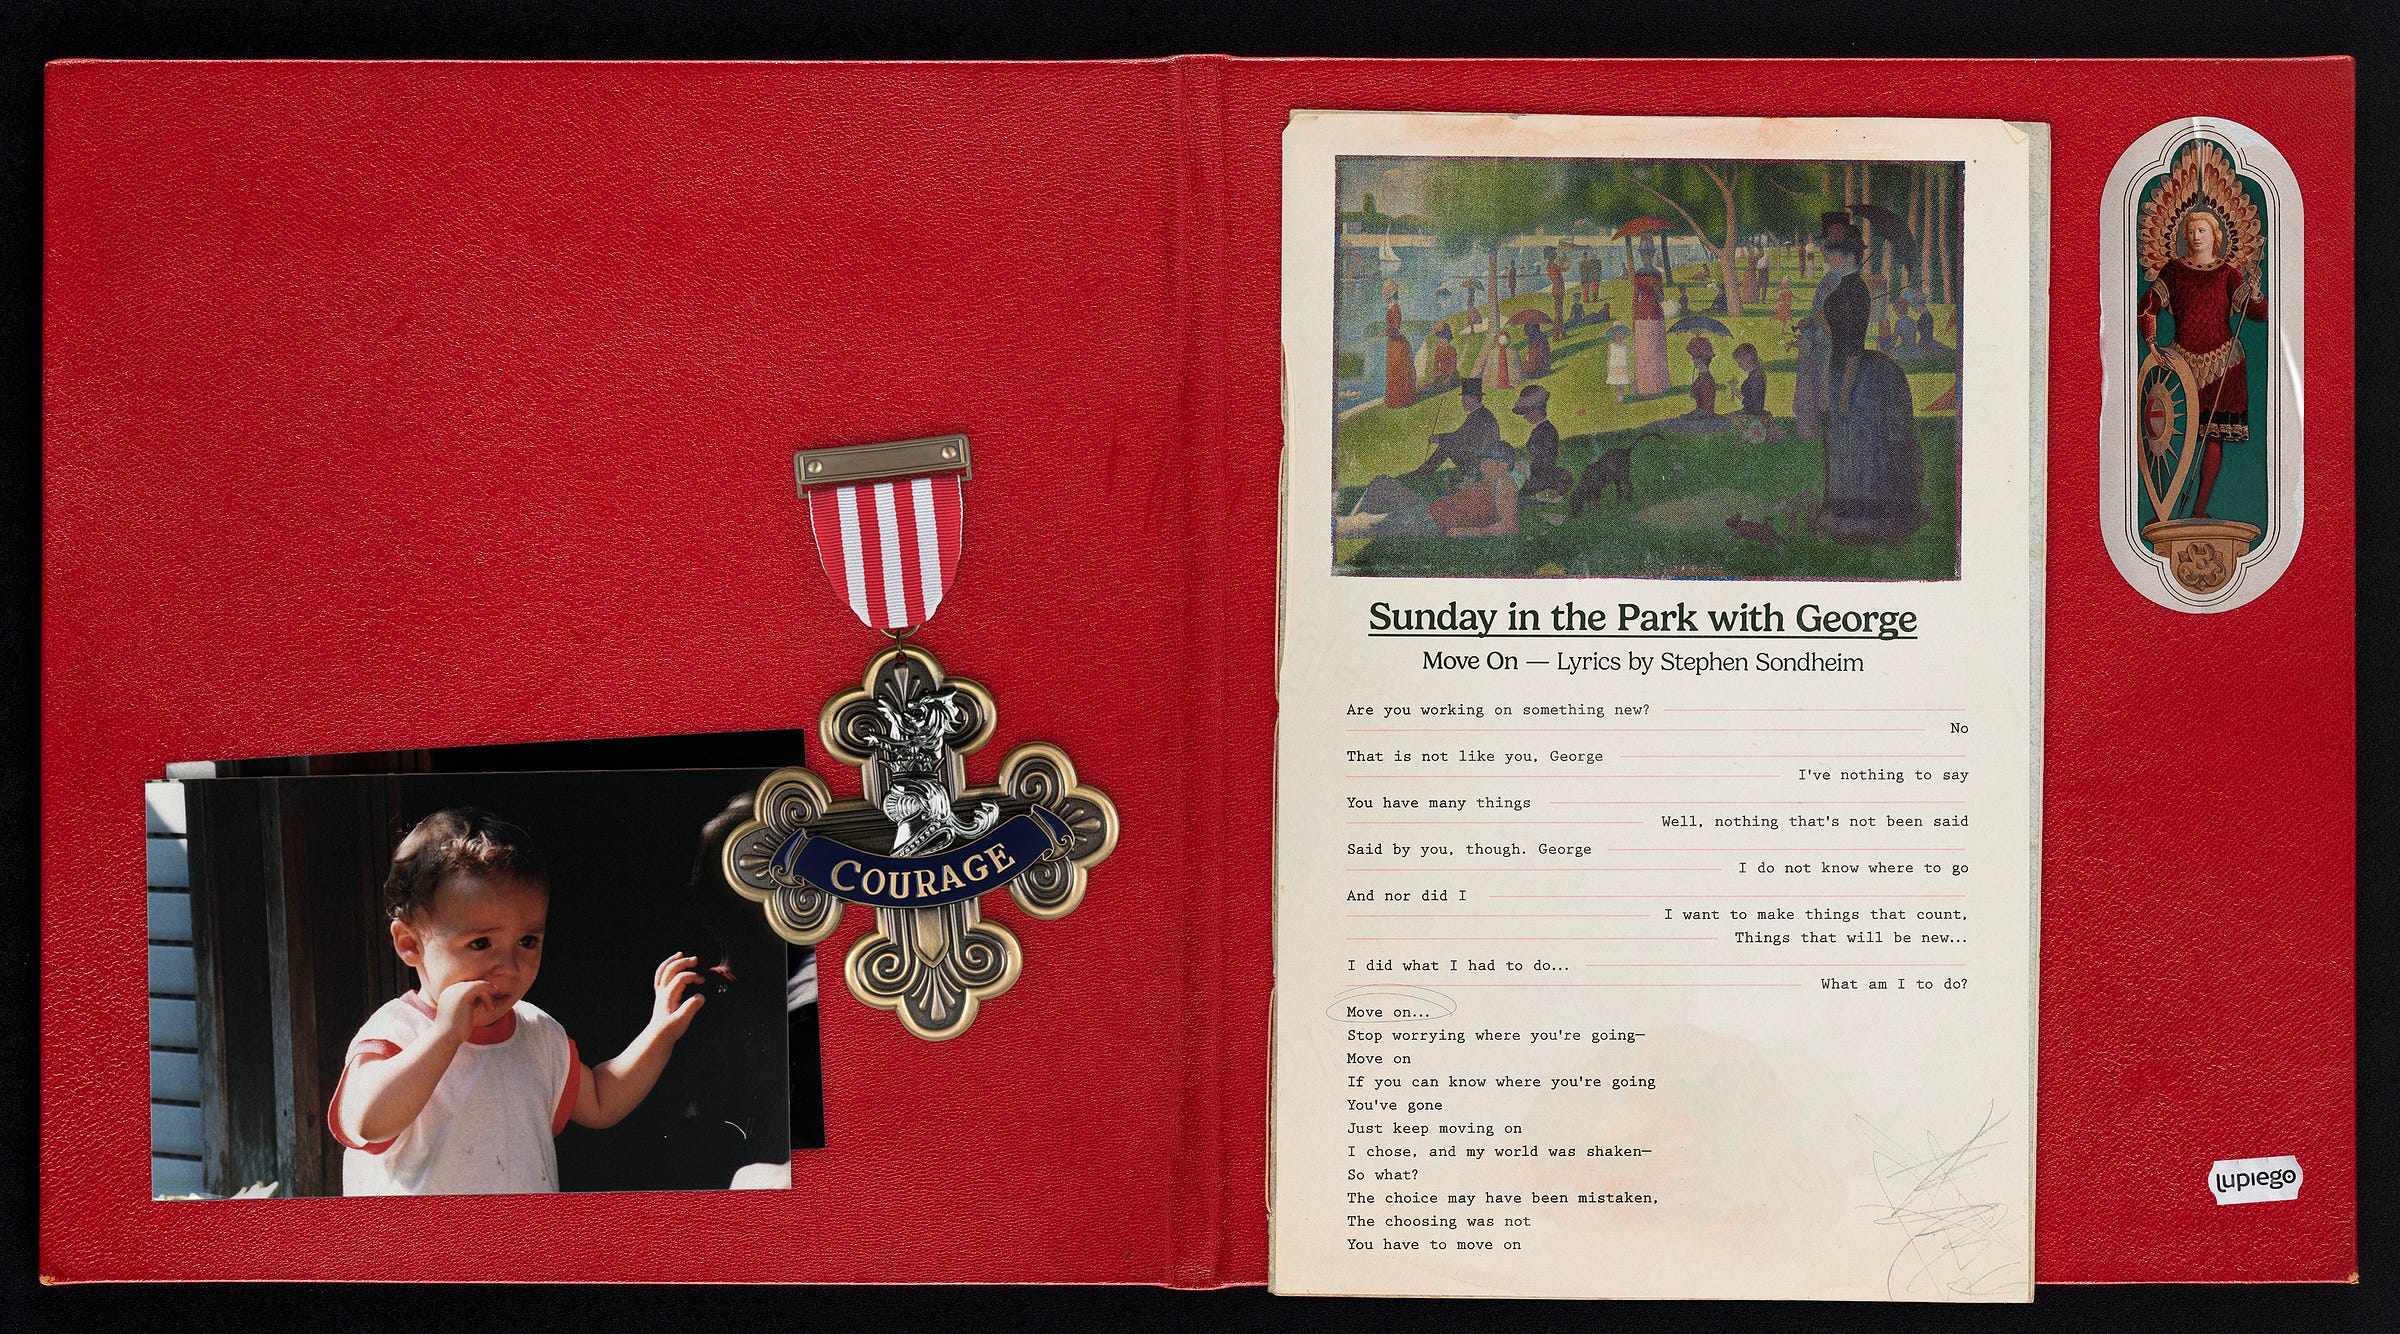 It is the back side of the red and gray album that has five elements over it. The first one is two stacked photographs of a toddler looking nervous. The second is a brass medal with “courage” written over it. The third is a sheet of paper with an image of A Sunday on La Grande Jatte by Georges Seurat and the lyrics to Move On from the musical Sunday in the Park with George. The fourth element is a sticker of an archangel. And the fifth is a small sticker with “Lupiego” written on it.